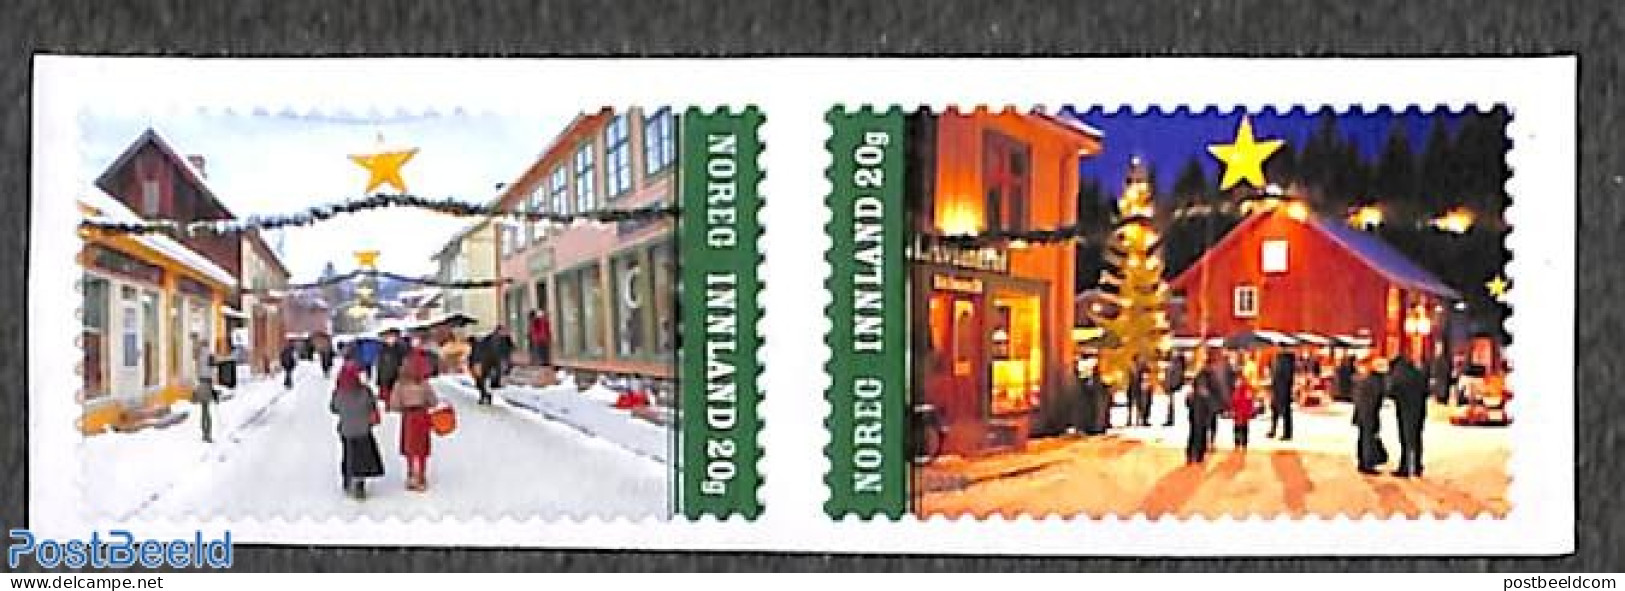 Norway 2020 Christmas 2v S-a, Mint NH, Religion - Christmas - Unused Stamps